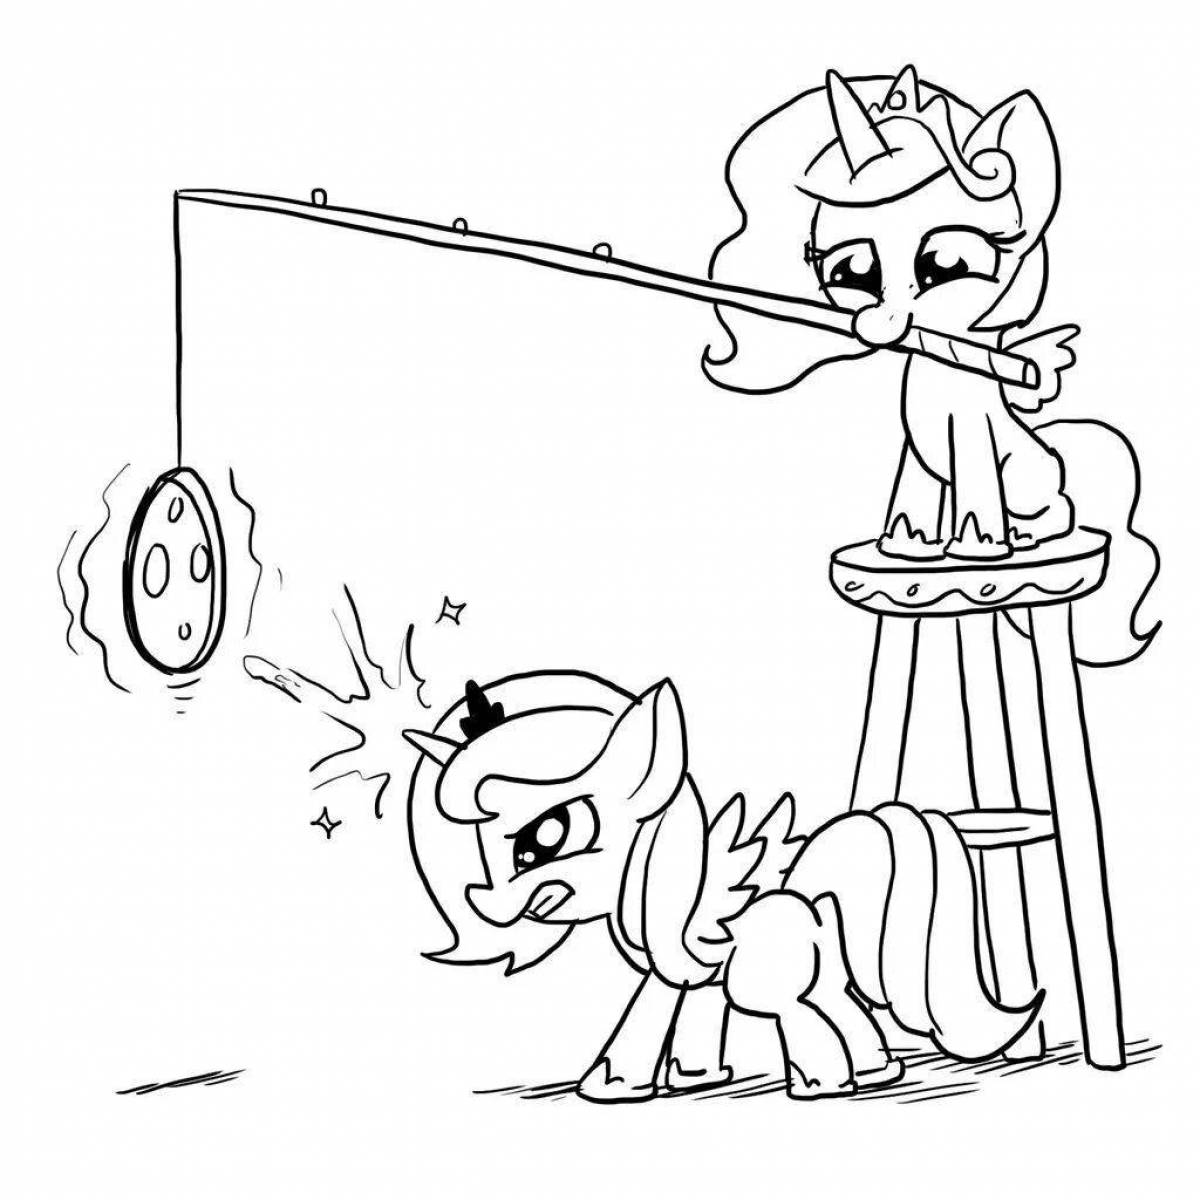 Animated Pony Time Coloring Page